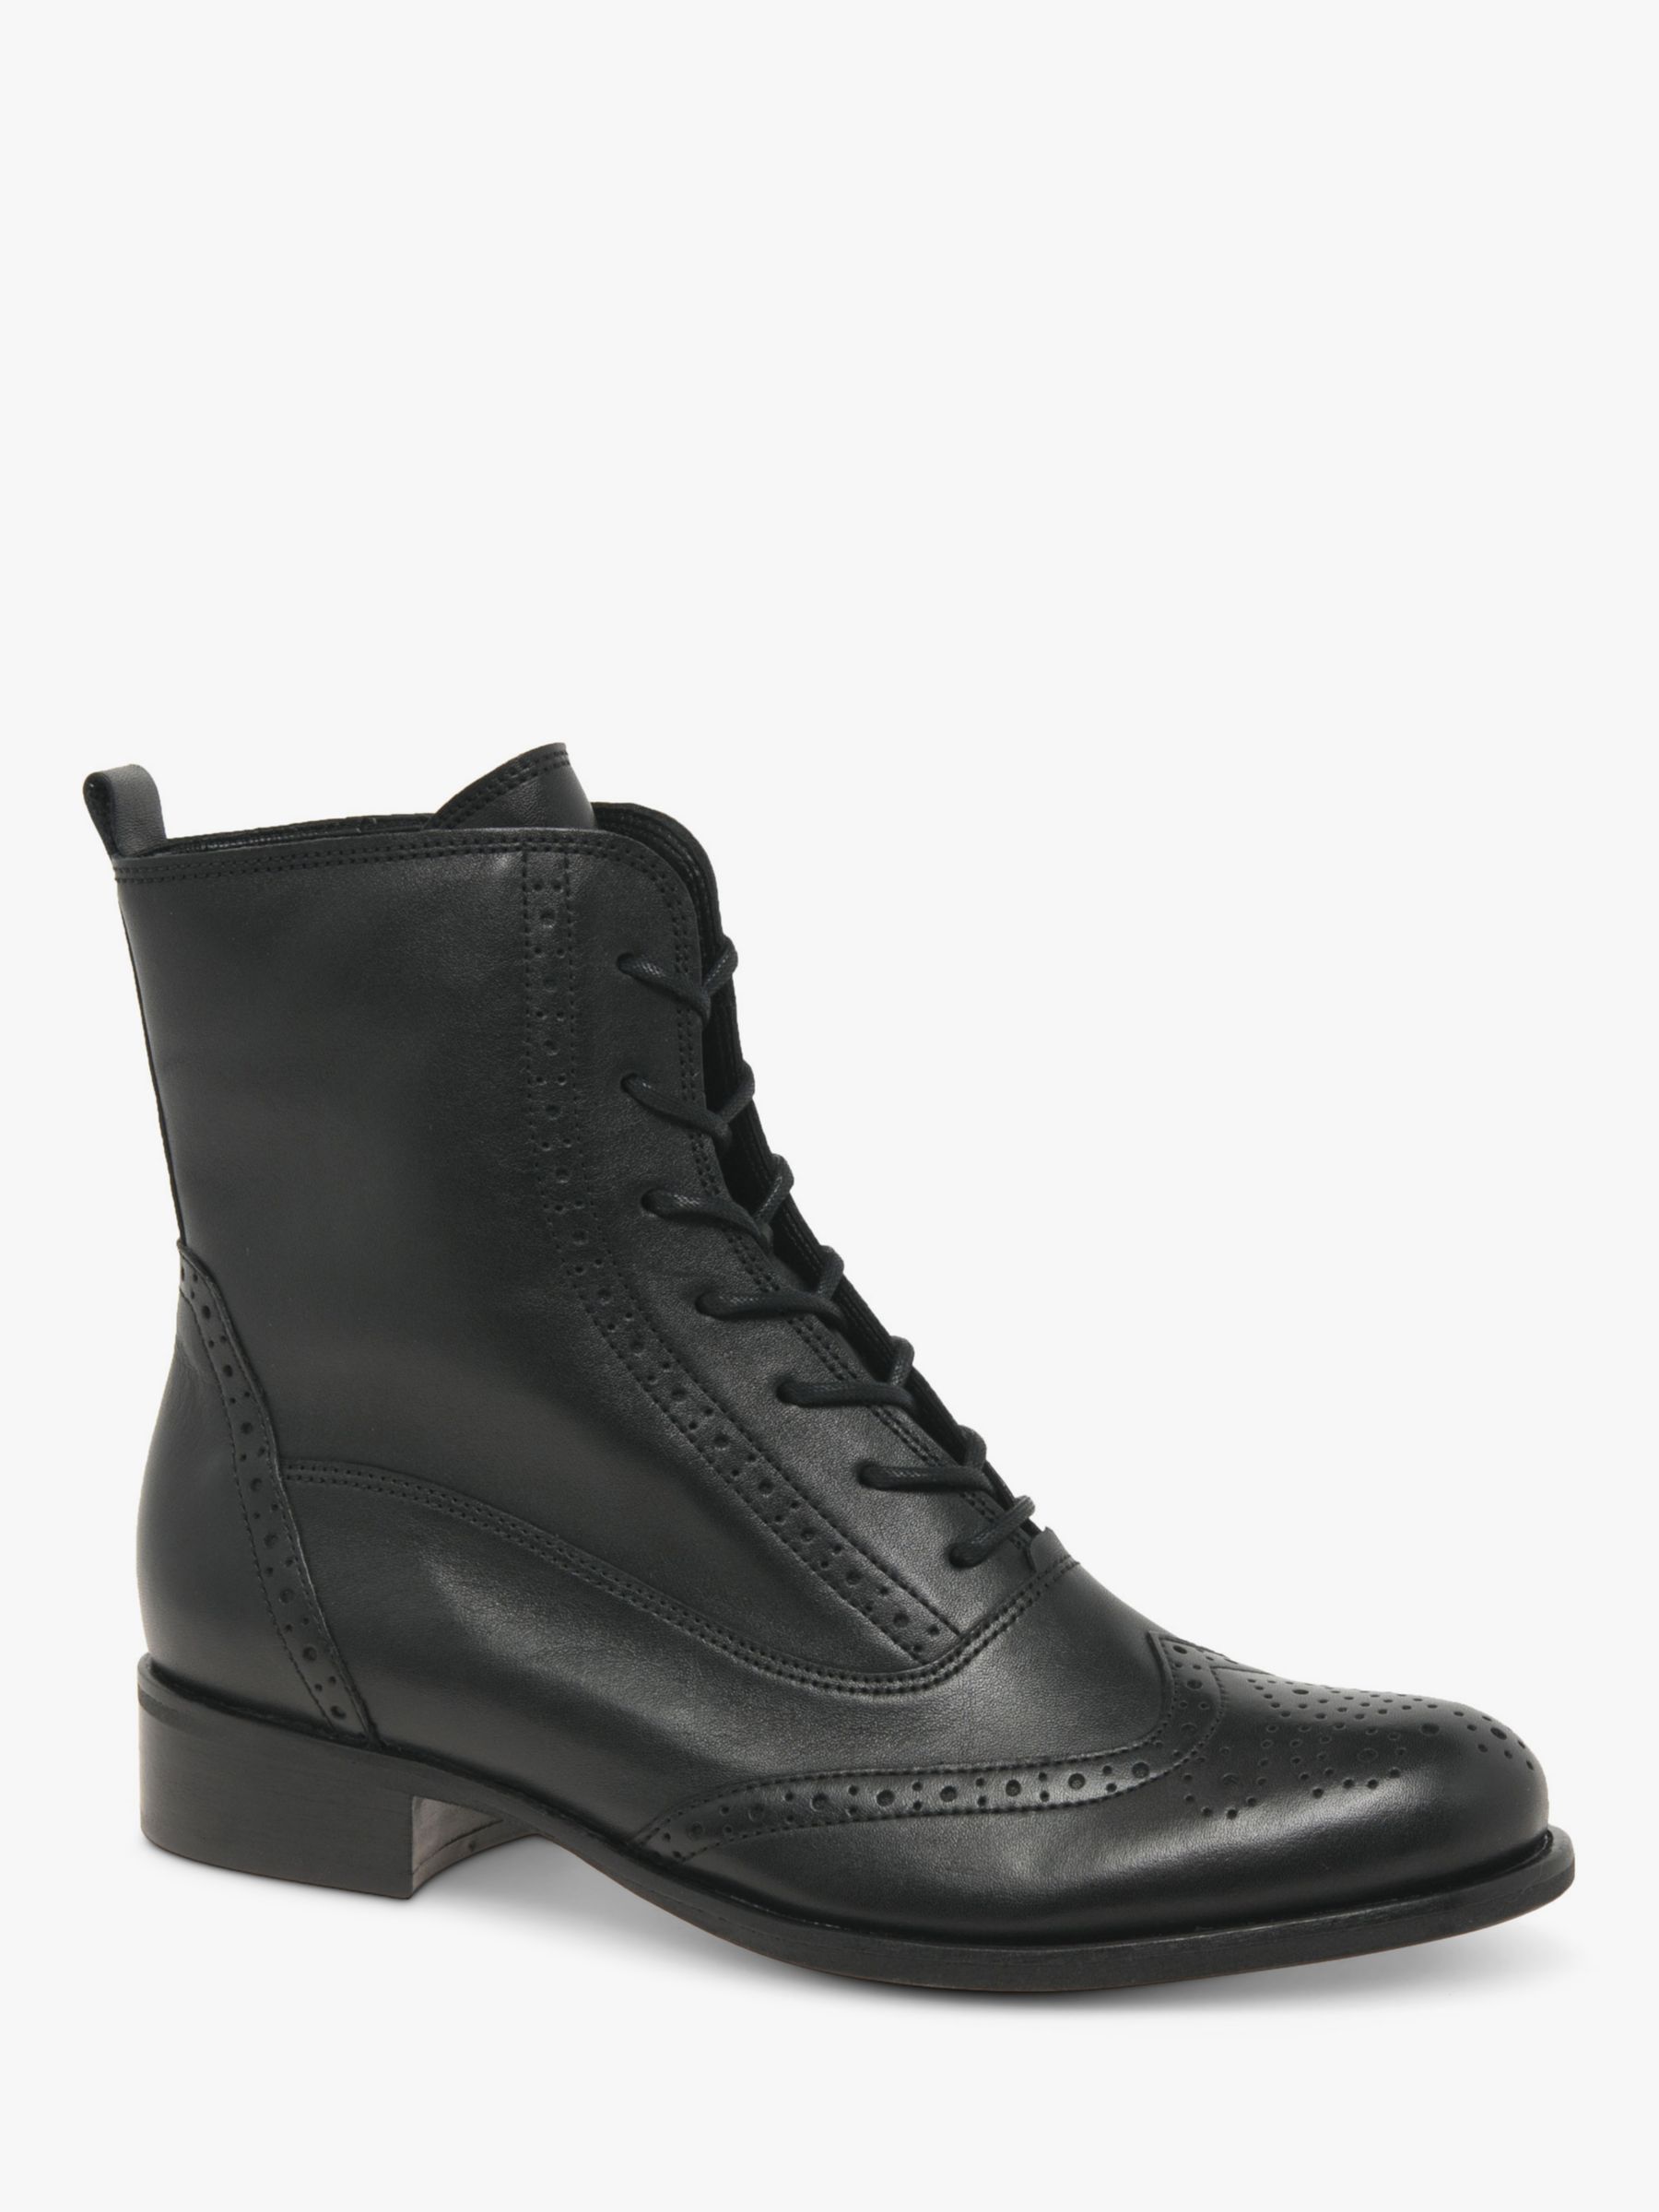 Gabor Positive Leather Brogue Ankle Boots, Black at John Lewis & Partners